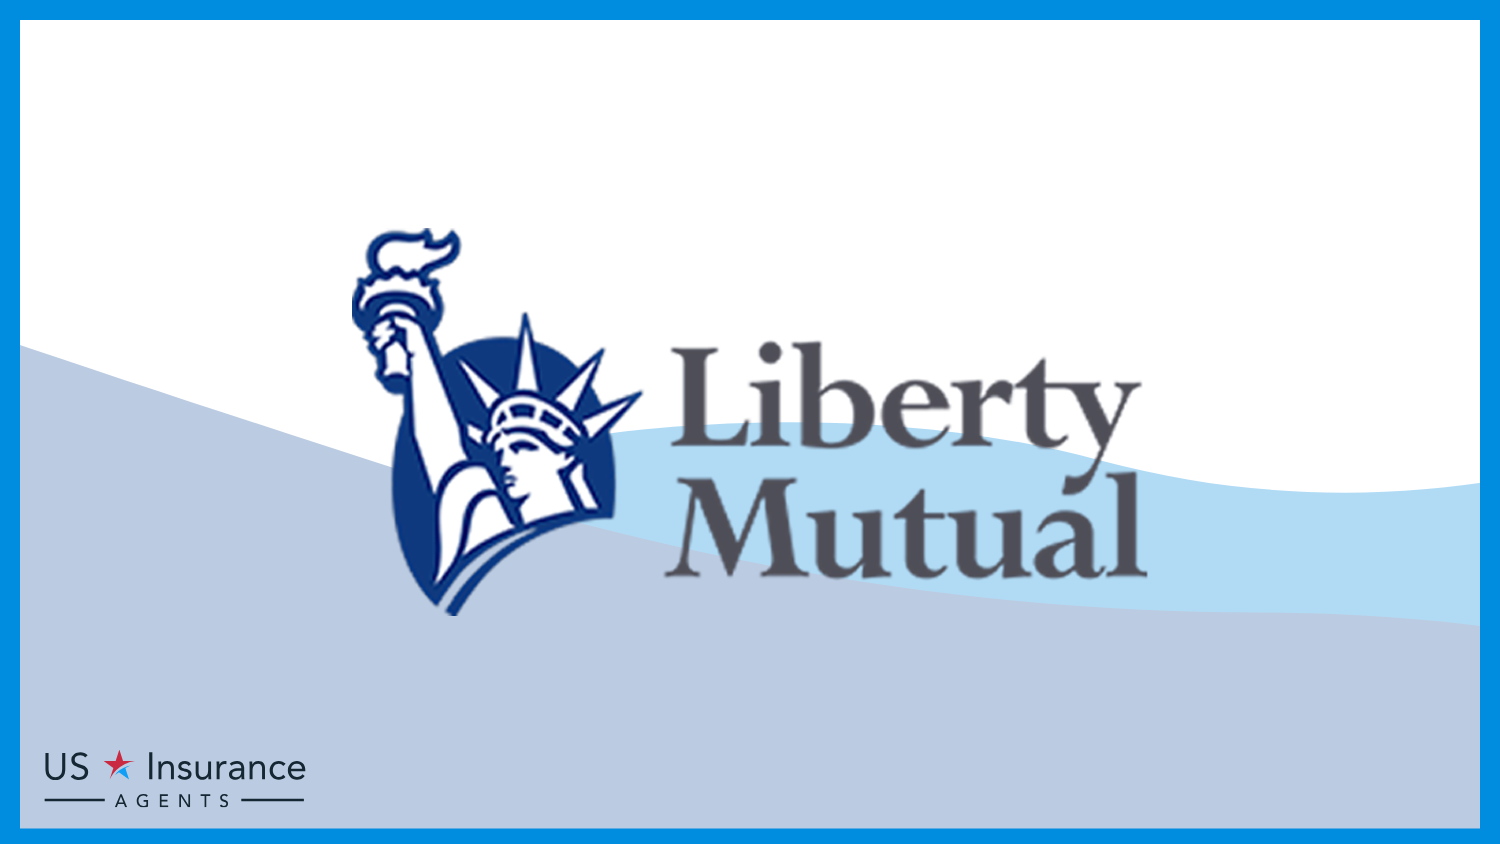 Best Car Insurance for Firefighters: Liberty Mutual